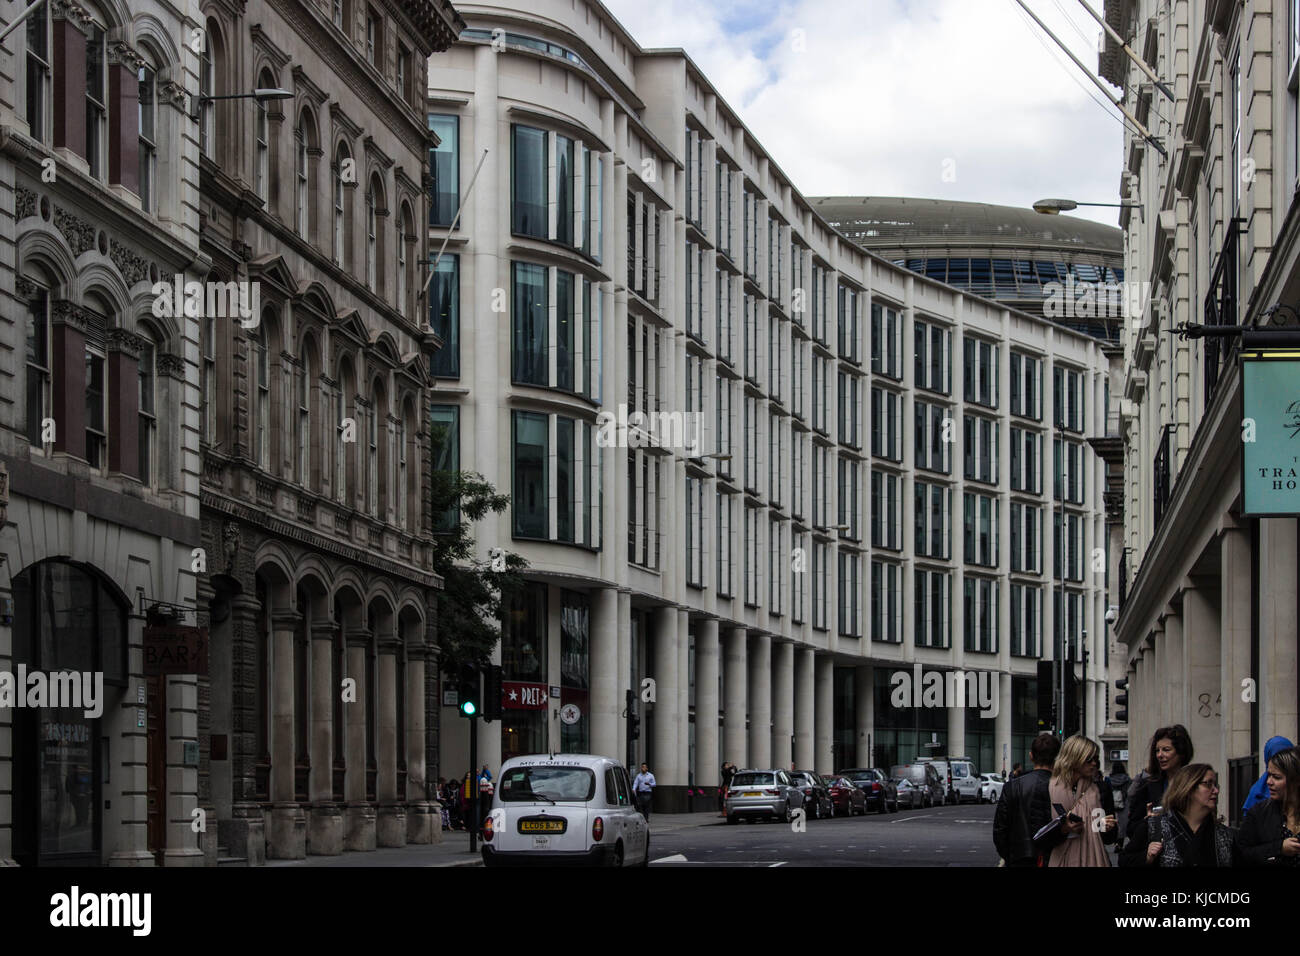 20 Gresham street building, with an unusual curved facade design and we can see a contrast between contemporary and old architecture, love this pic:) Stock Photo